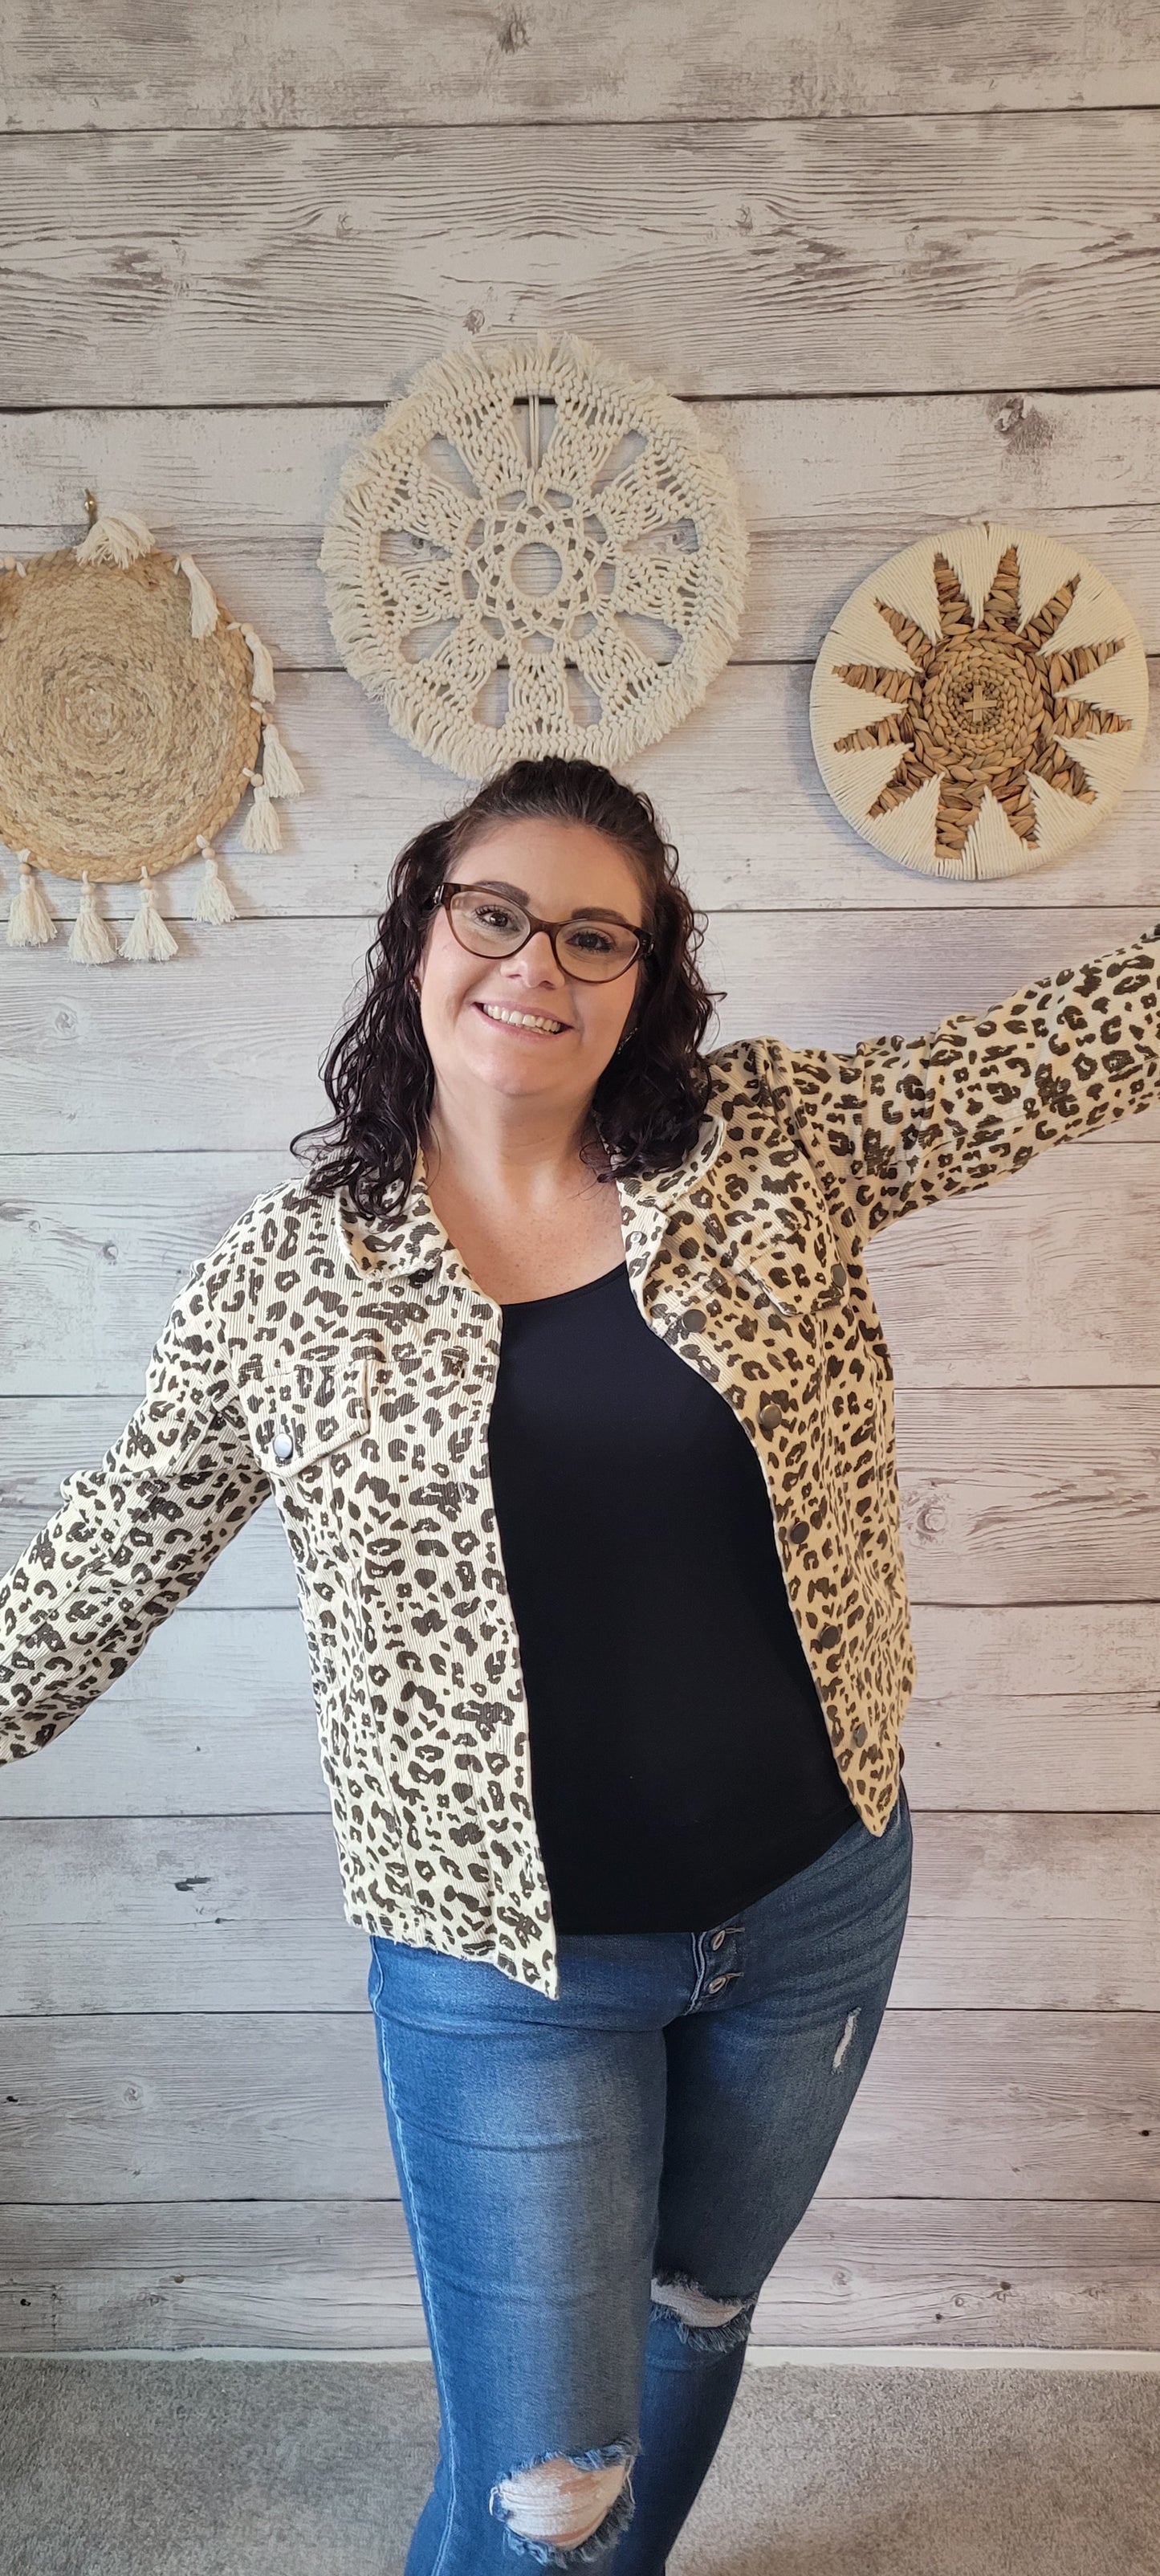 Cozy up in this out-of-the-ordinary "Emerie Ivory Washed Leopard Trucker Jacket". A fashion statement with flair, this frayed-edge beauty features metal button front closure and plenty of pockets for your stuff. Put it on and get ready to roar! Sizes small through large.